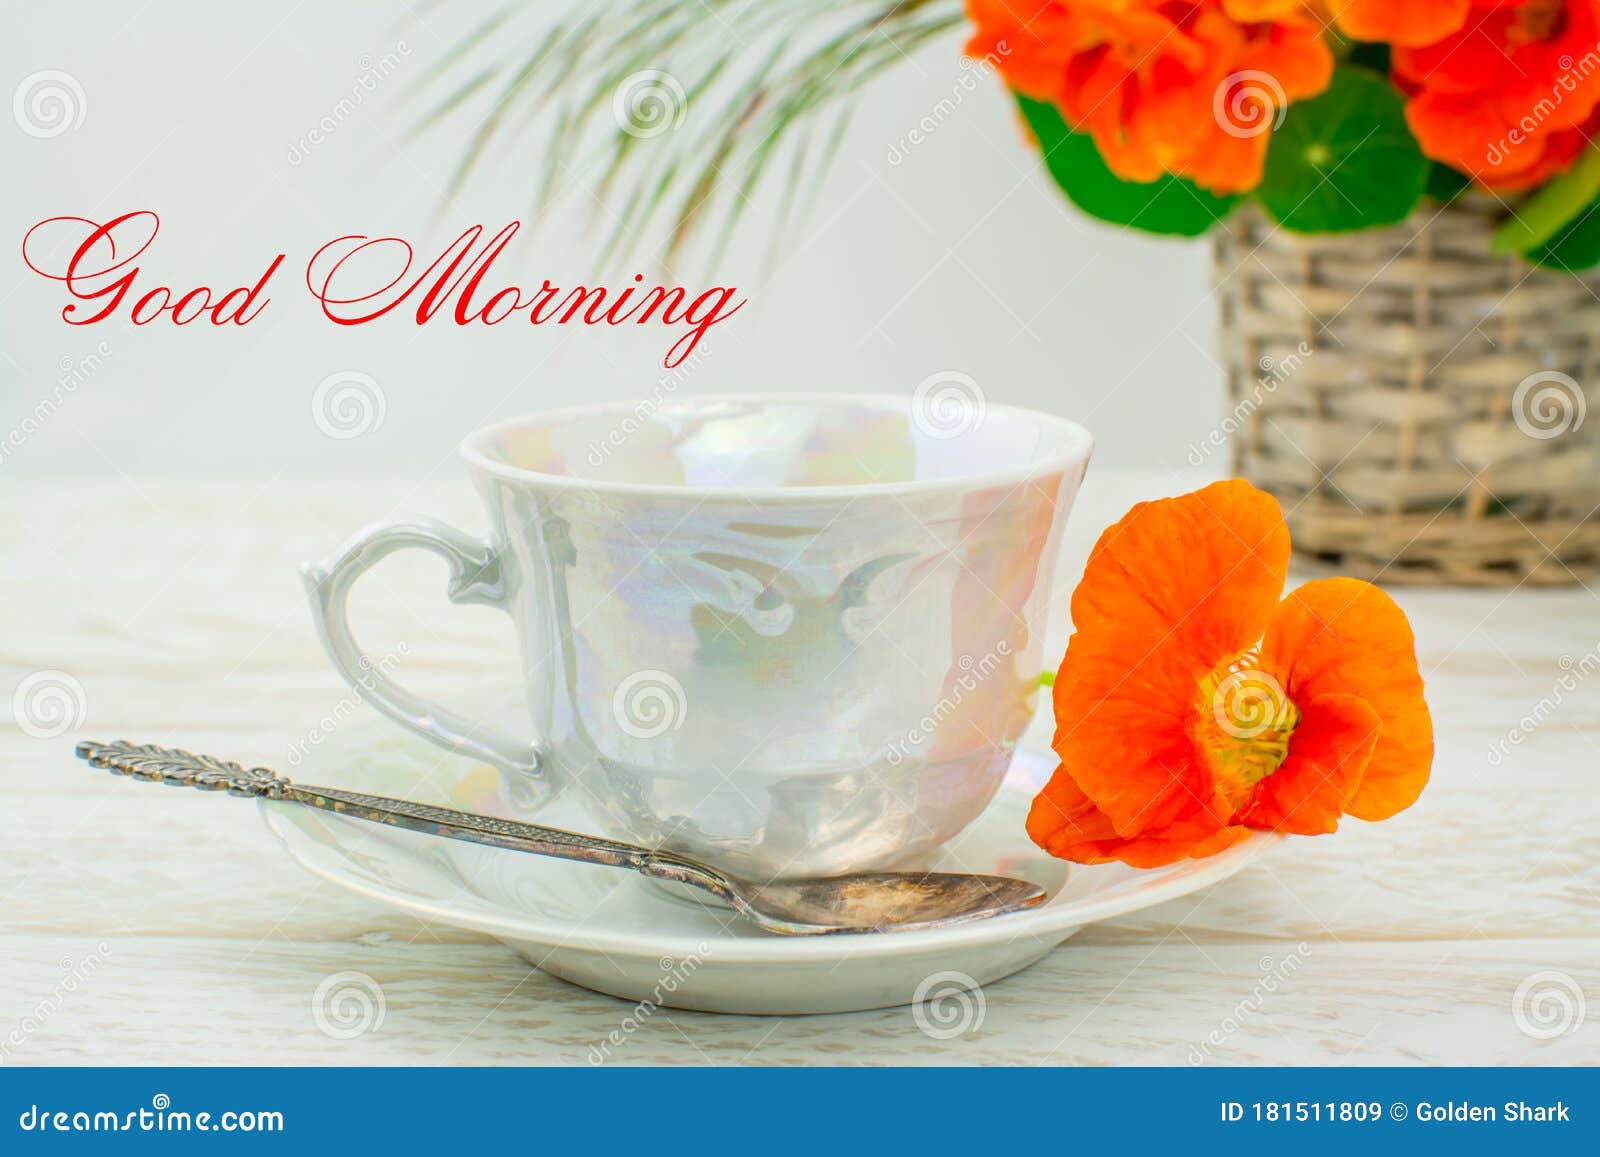 Good Morning Text Cup of Coffee Stock Image - Image of flowers ...